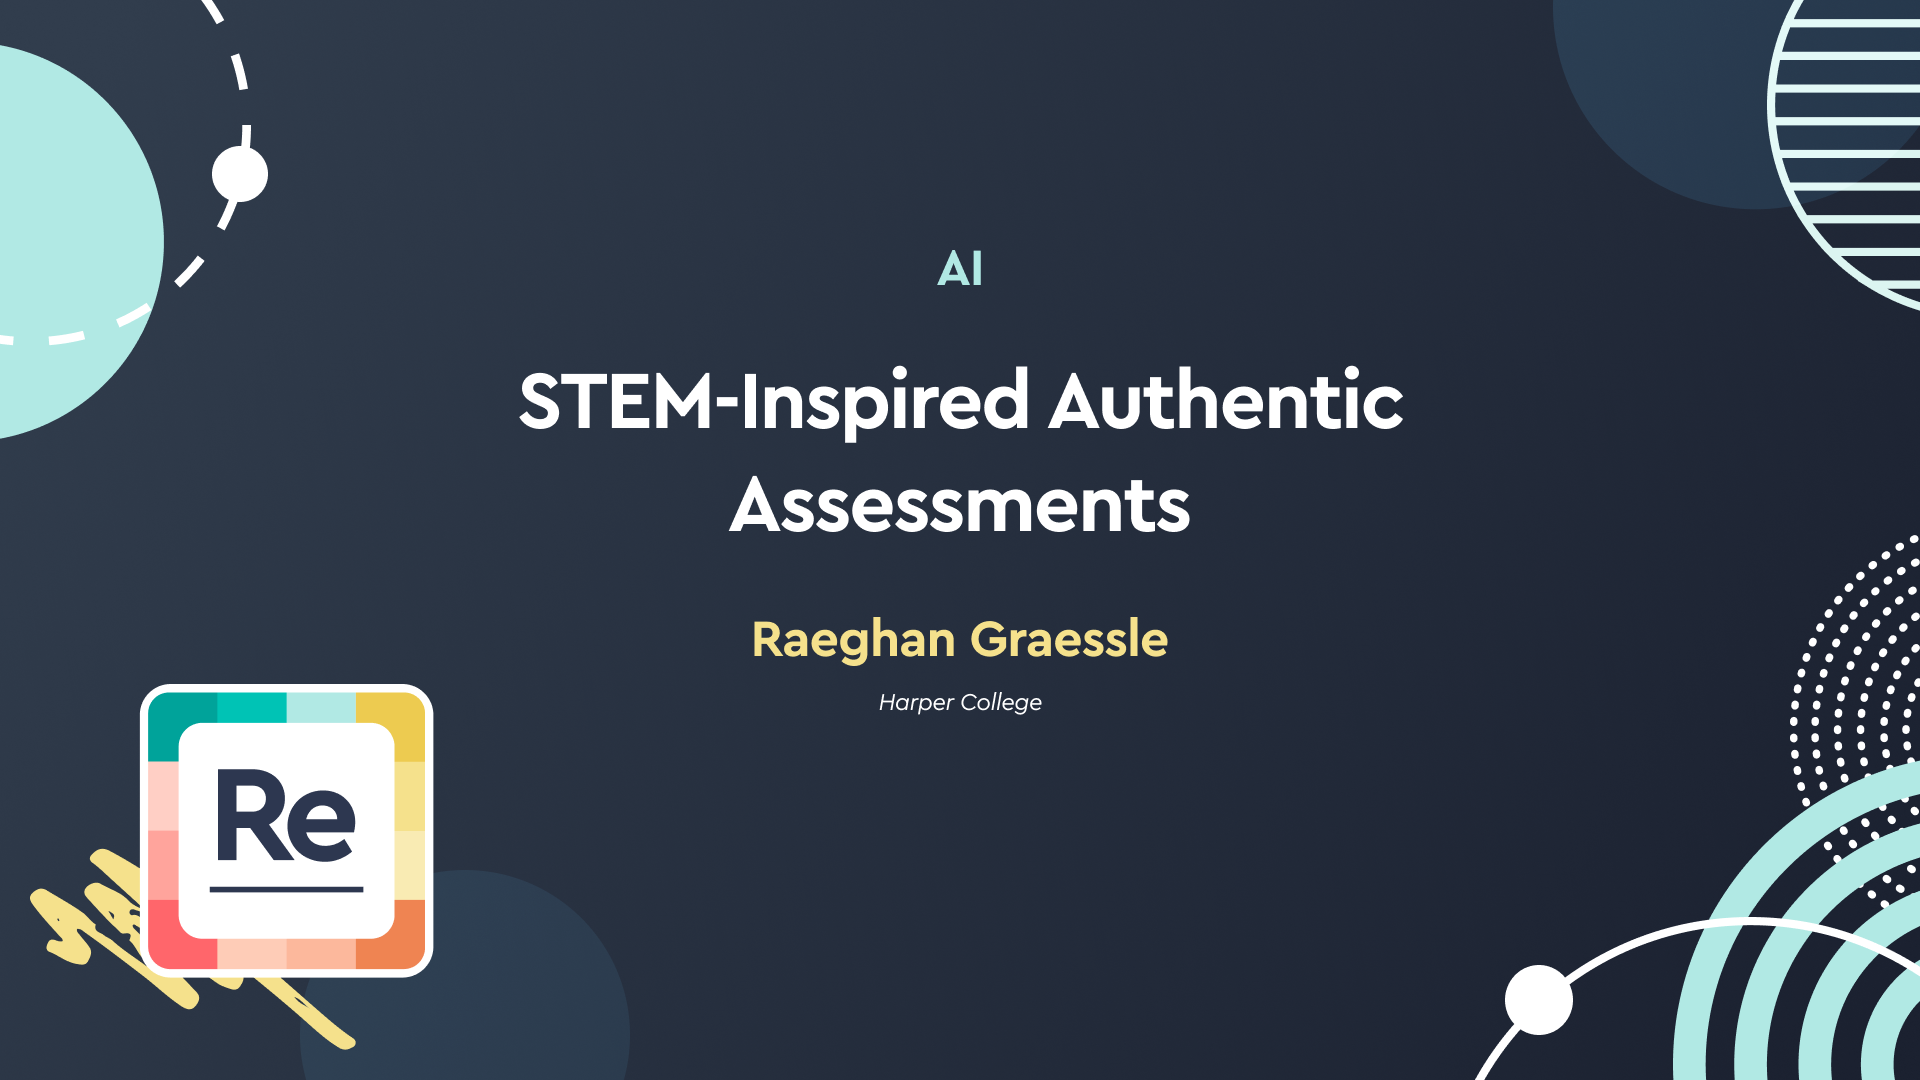 STEM-Inspired Authentic Assessments